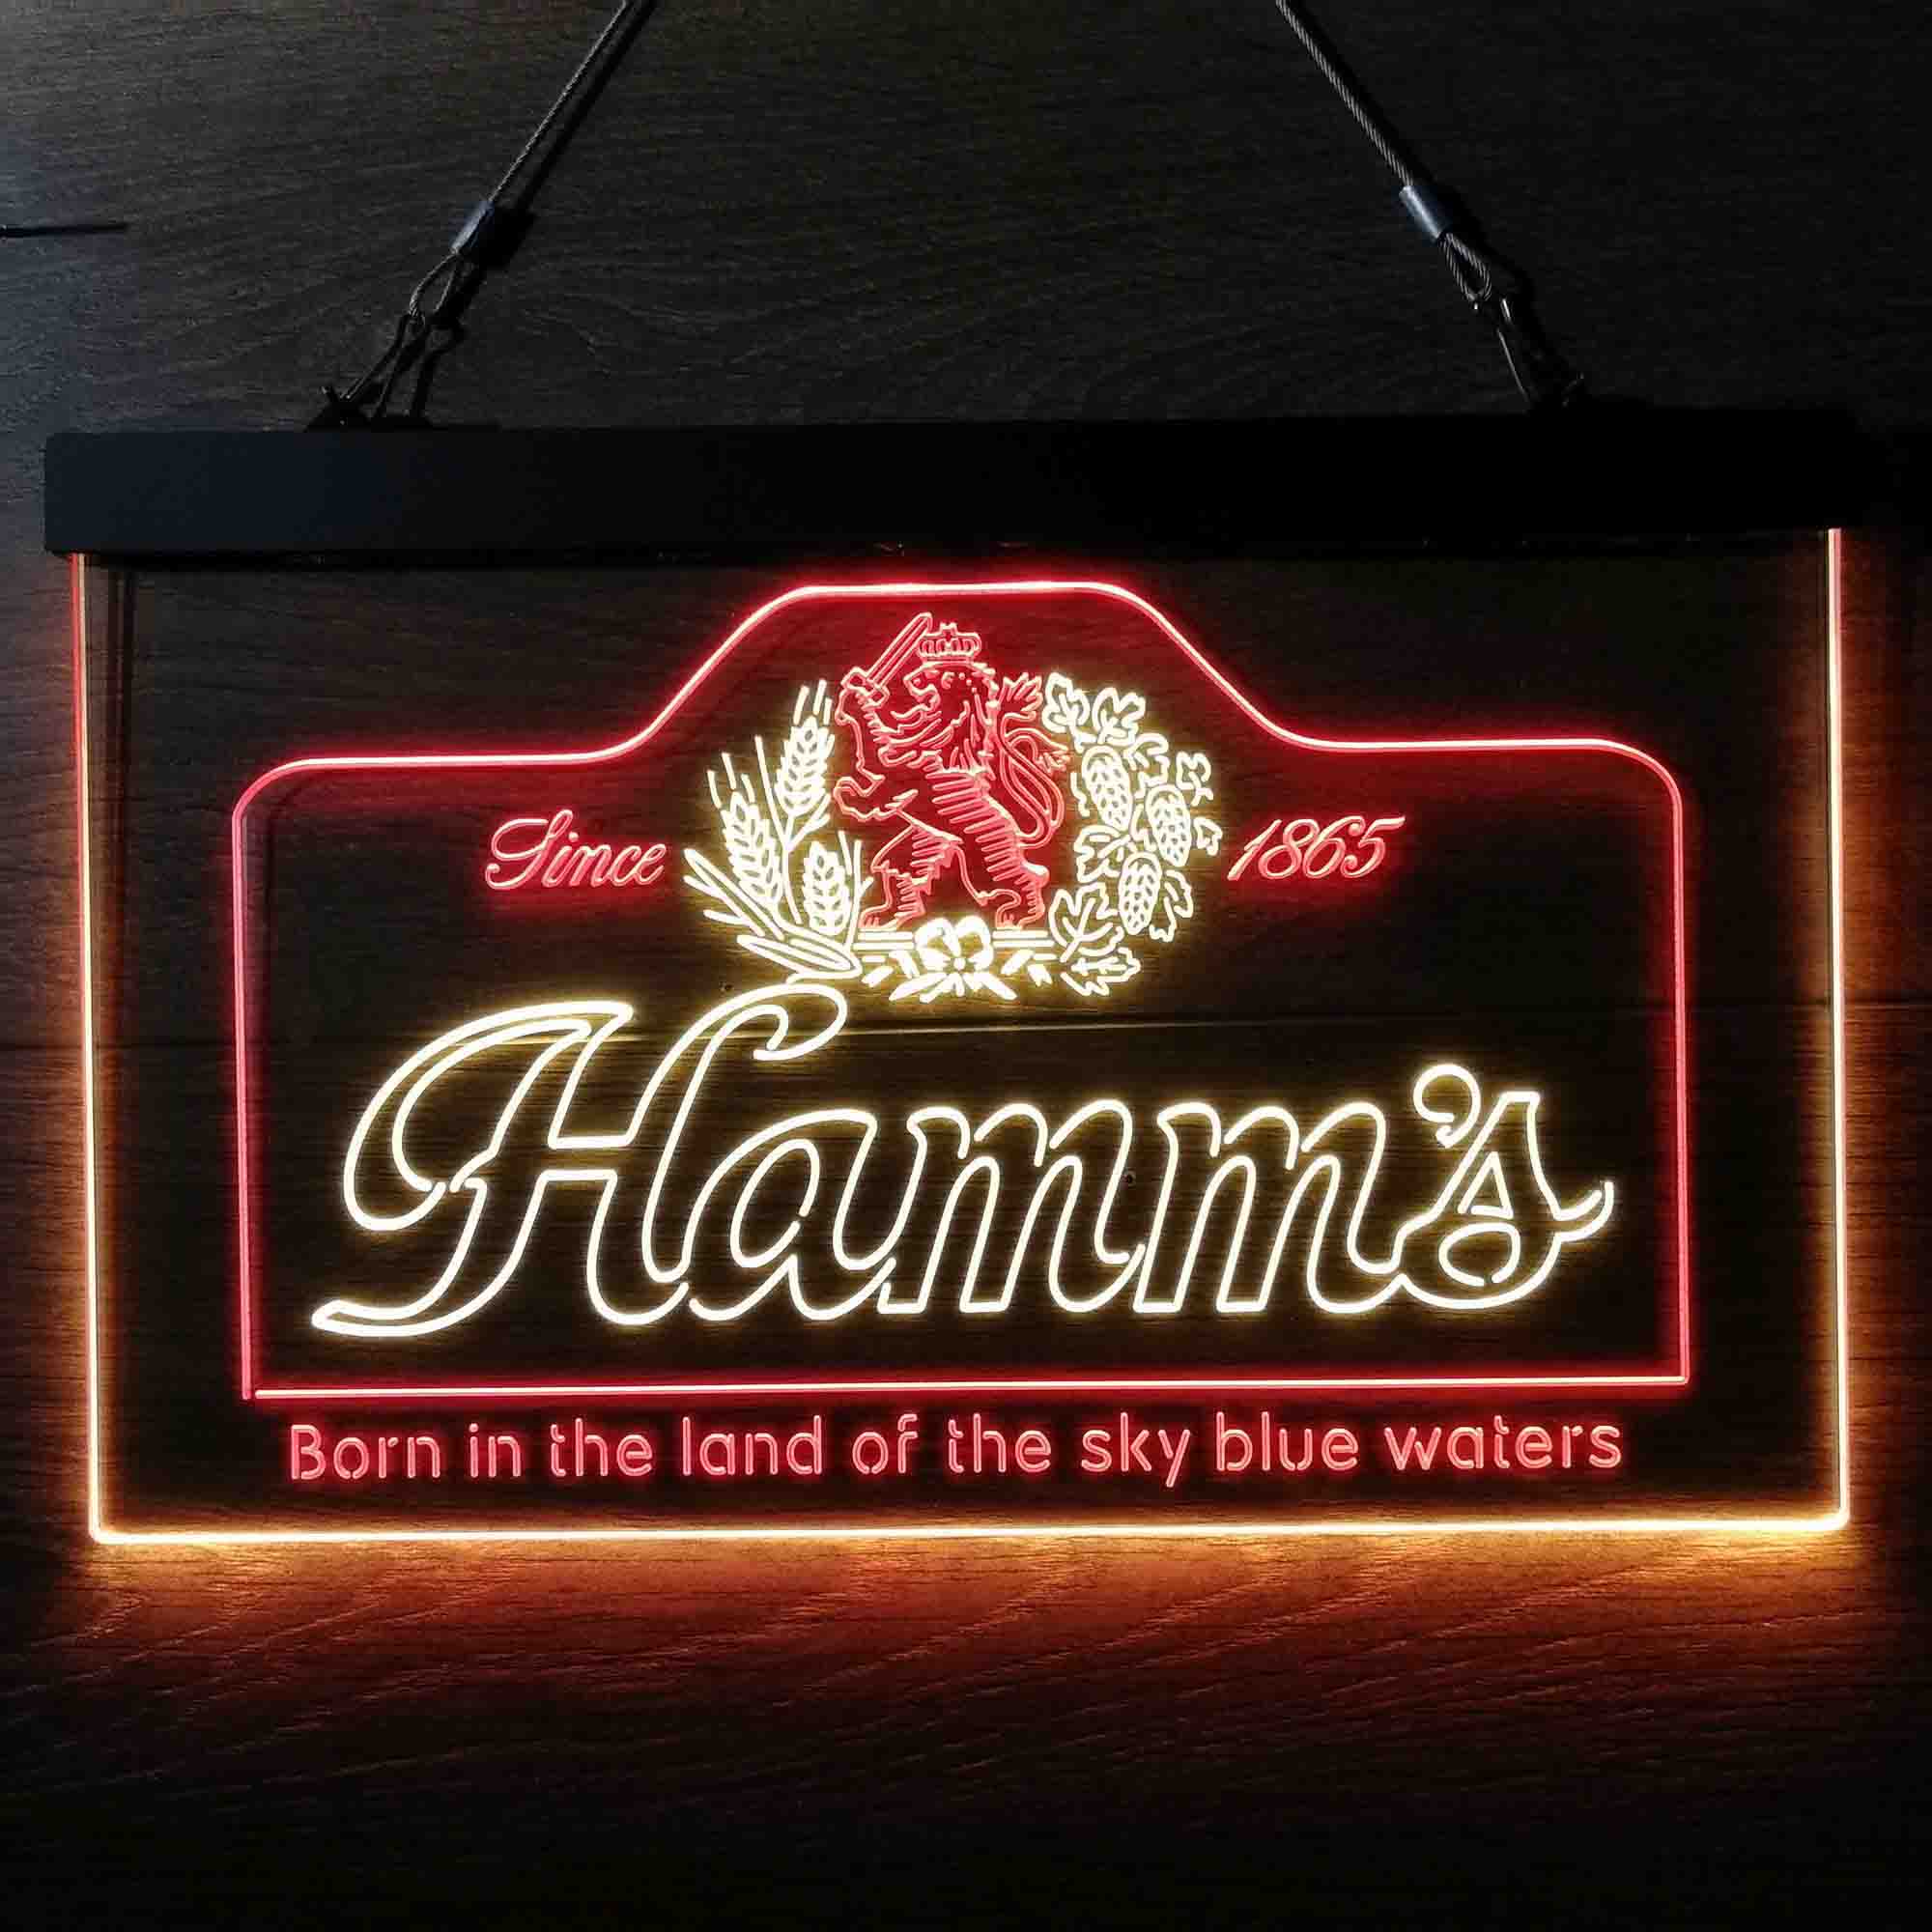 Hamm's Beer Since 1865 Neon-Like LED Sign